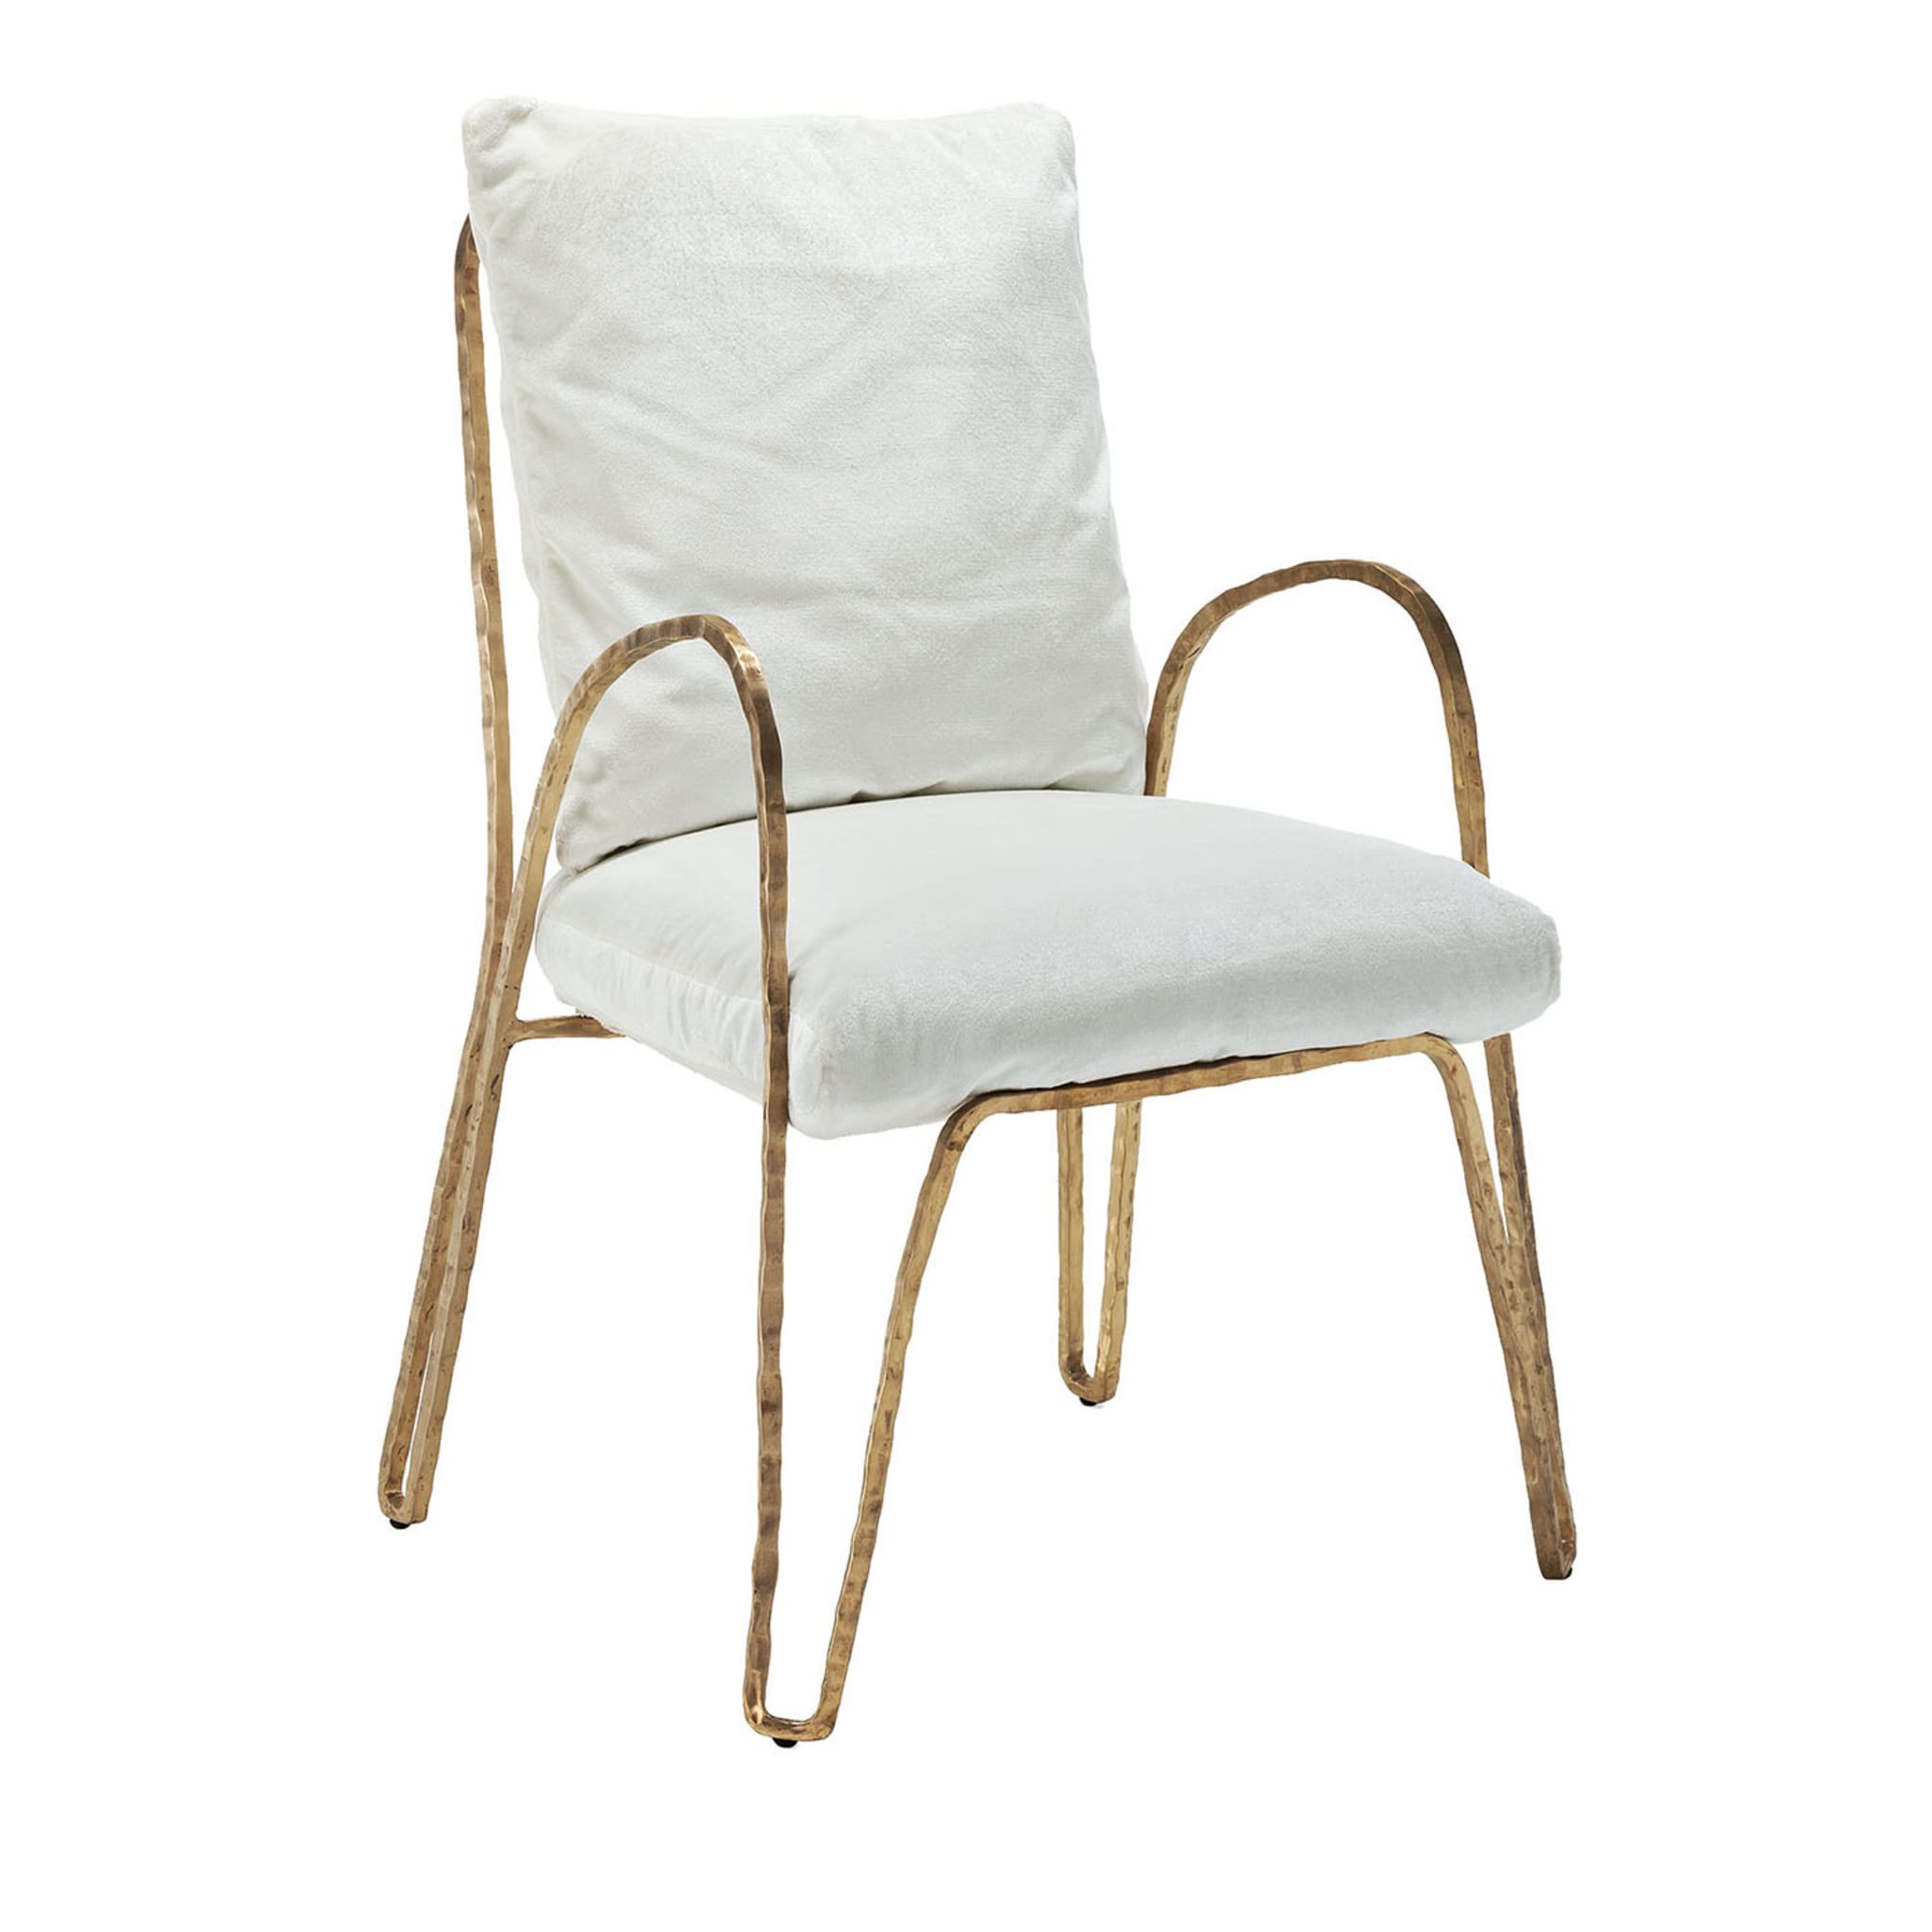 Moonlight White and Gold High Chair - Main view